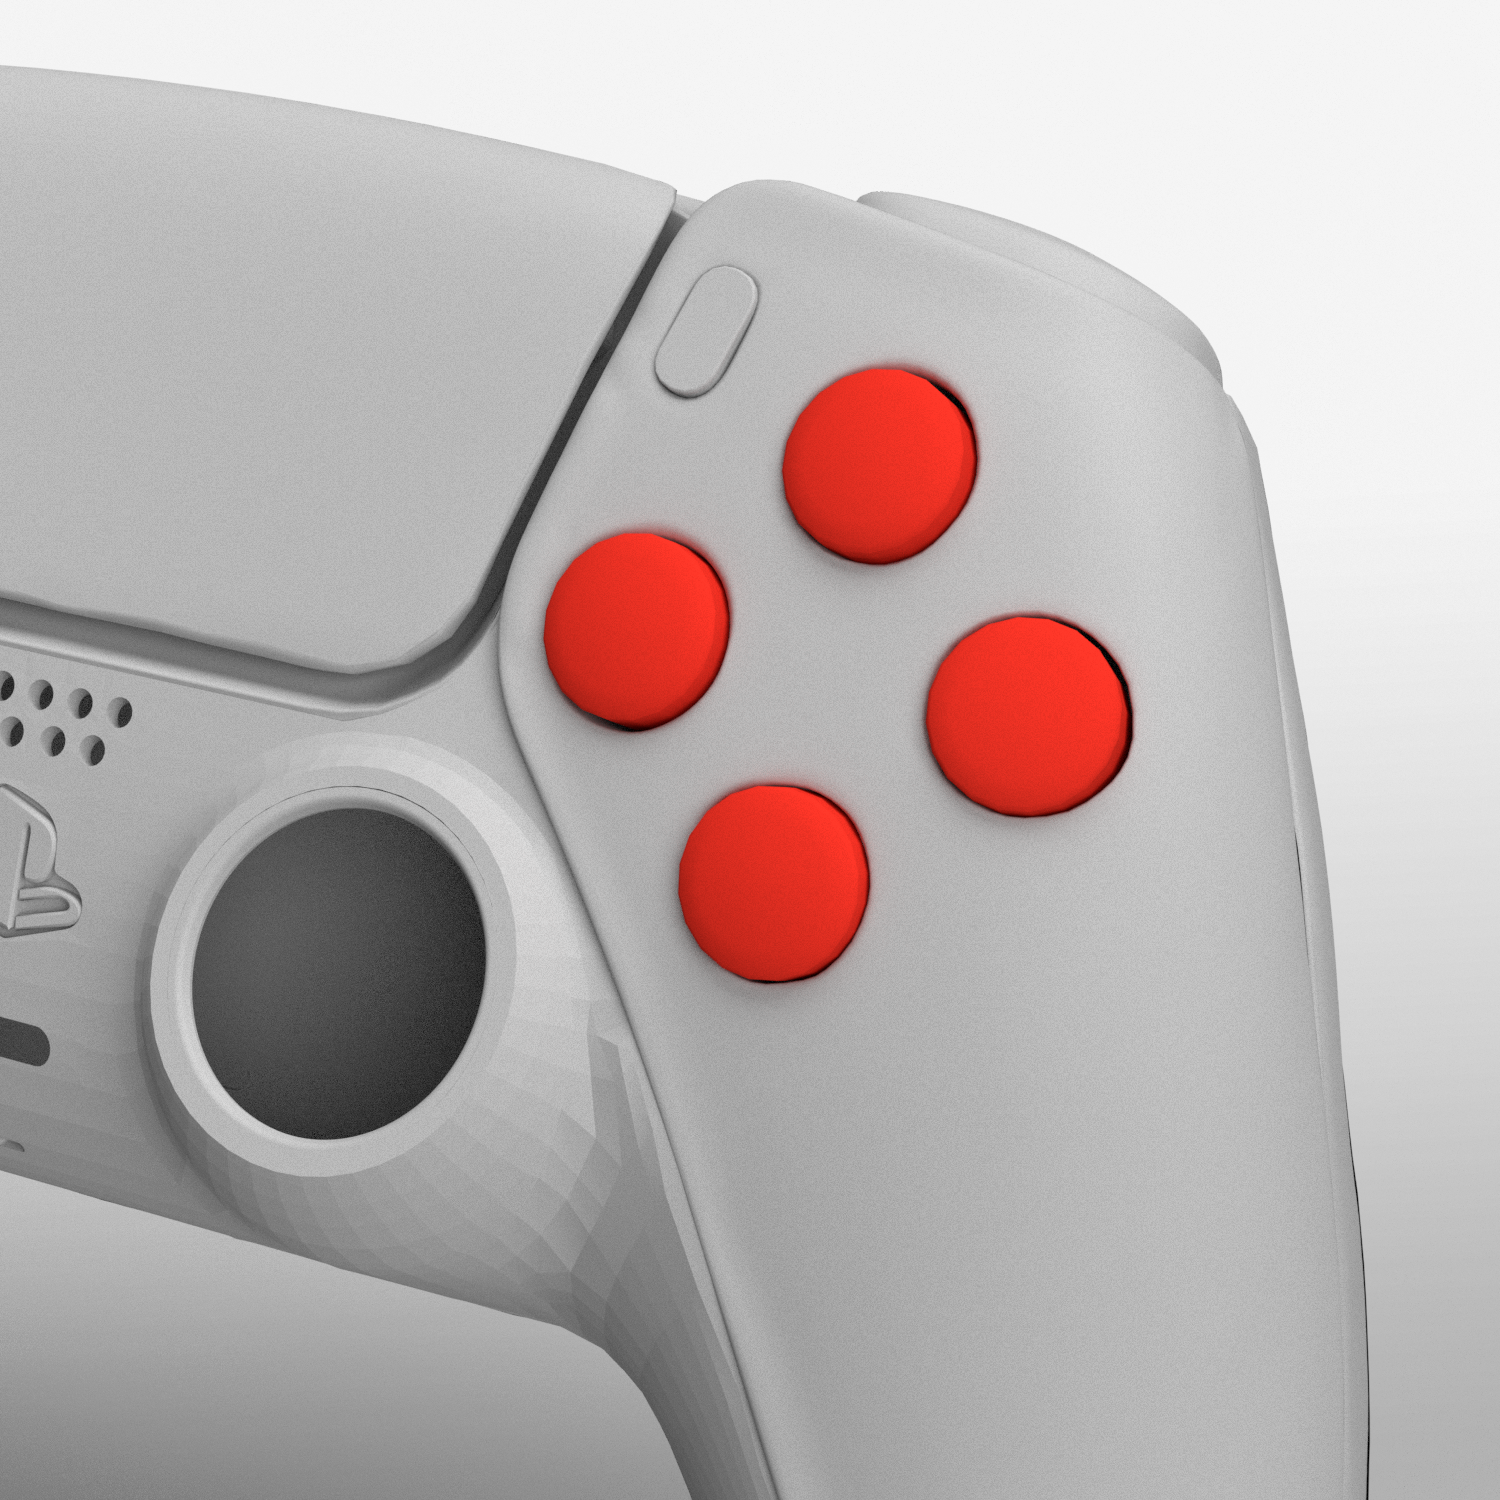 PS5 Soft Touch Face Buttons